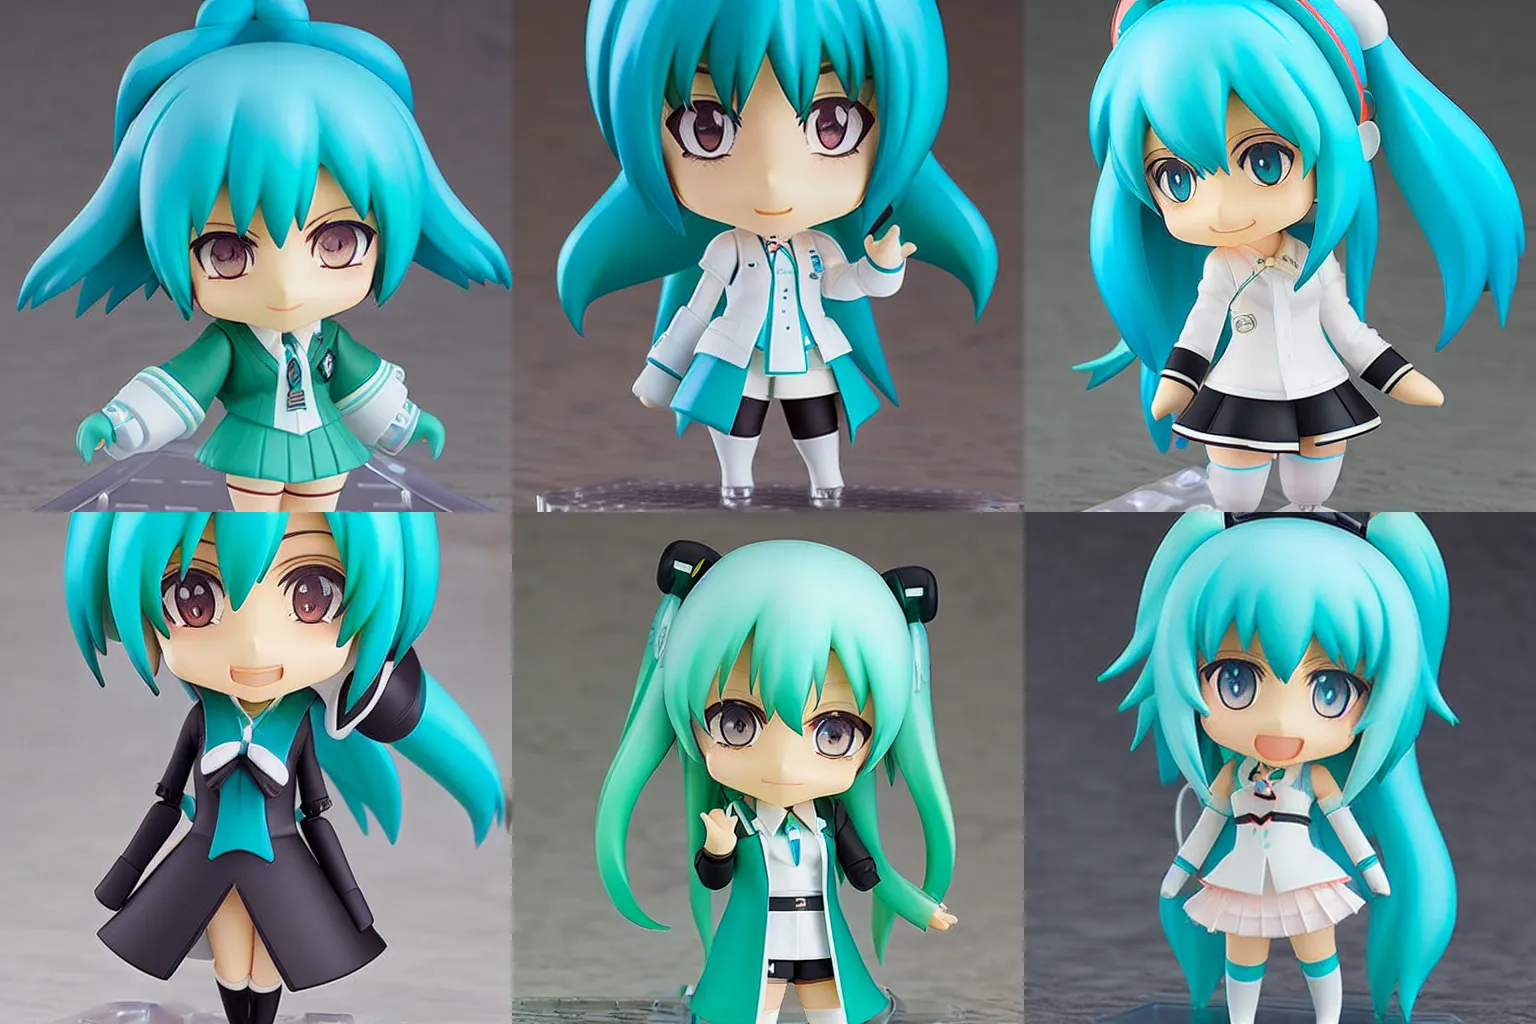 Prompt: a Nendoroid of hatsune Miku, limited edition